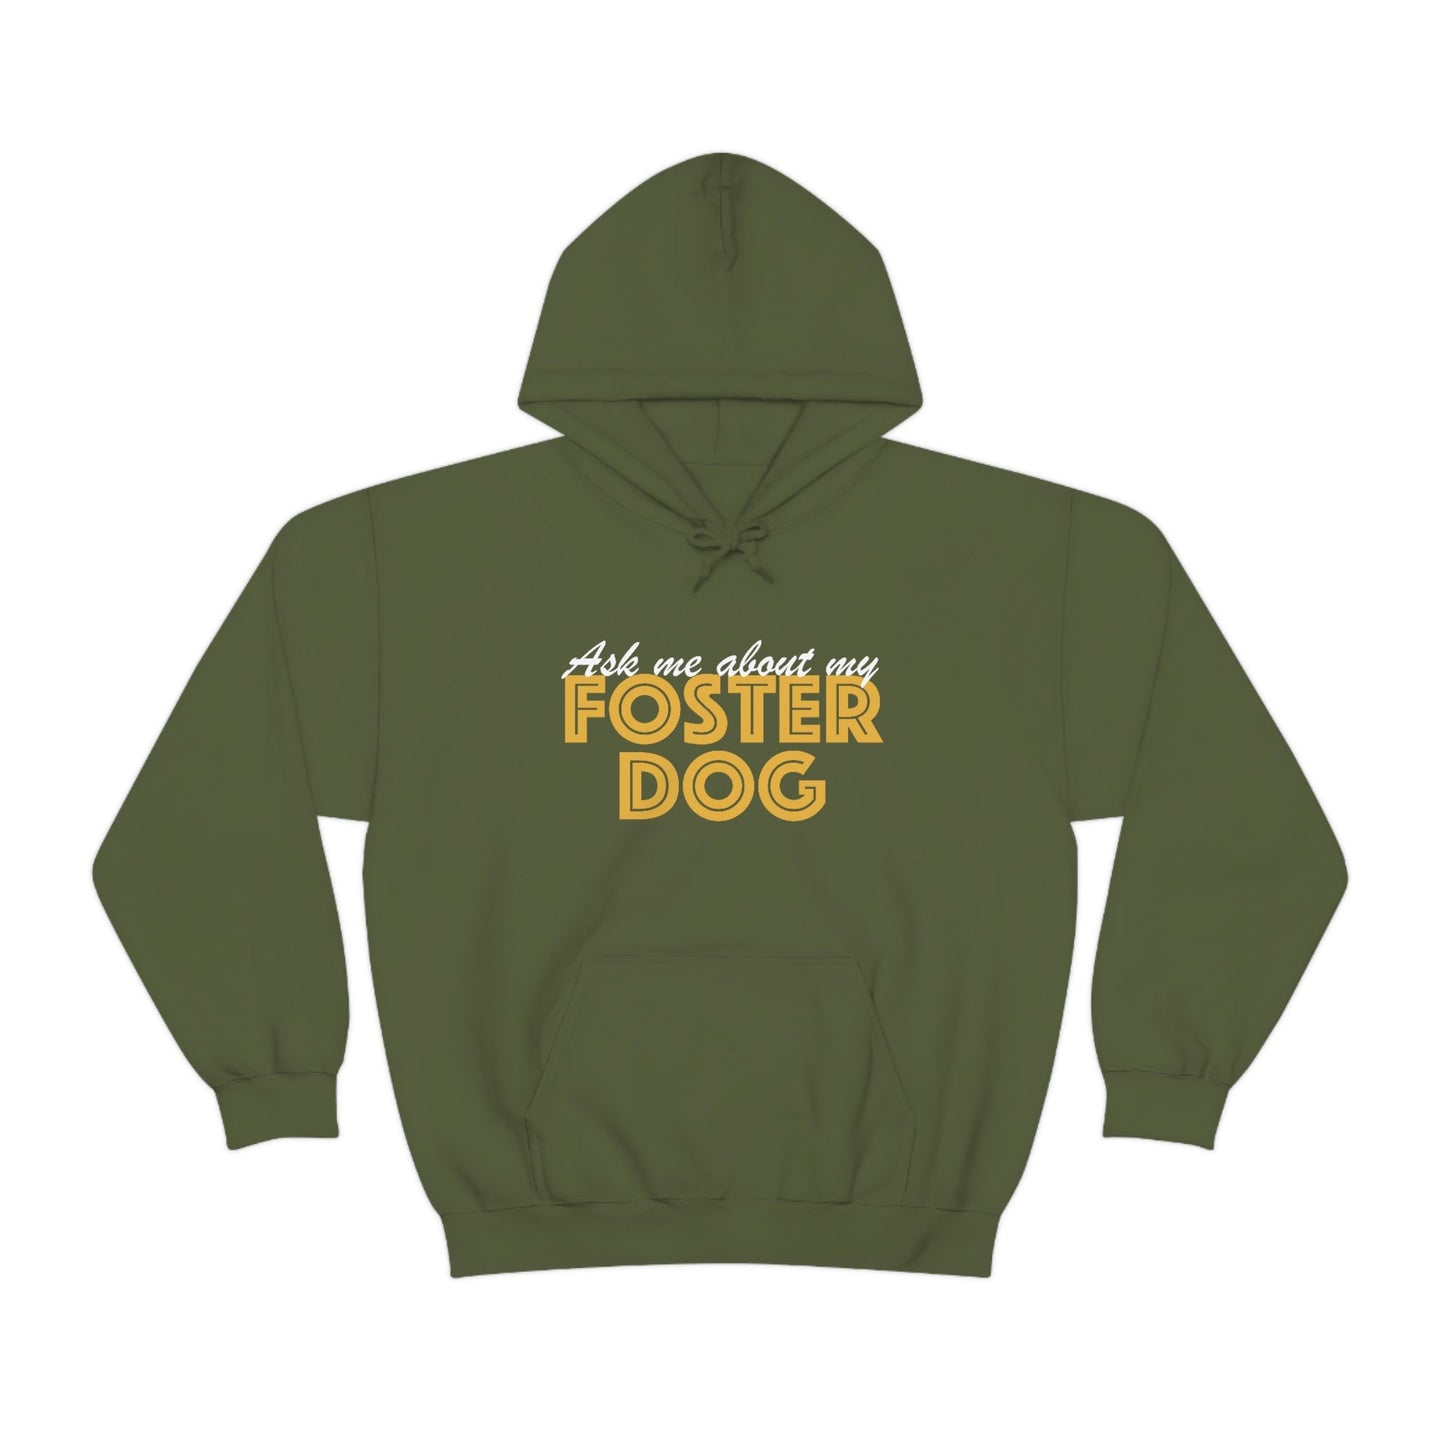 Ask Me About My Foster Dog | Hooded Sweatshirt - Detezi Designs-44988716748687844845